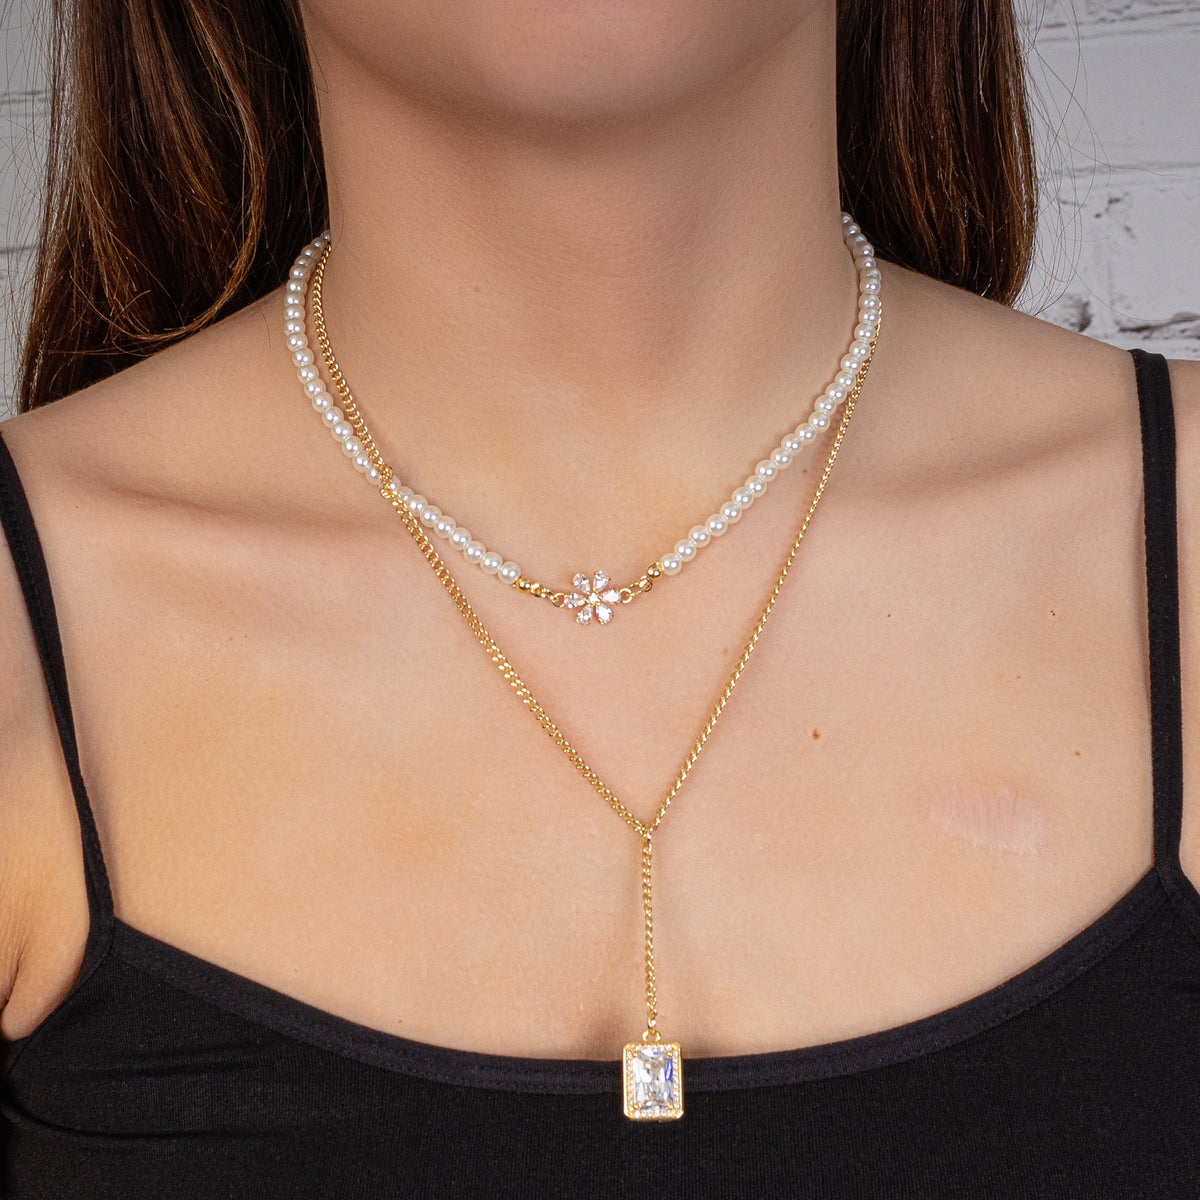 1127 - Dainty Layered Pendant Necklace - Gold